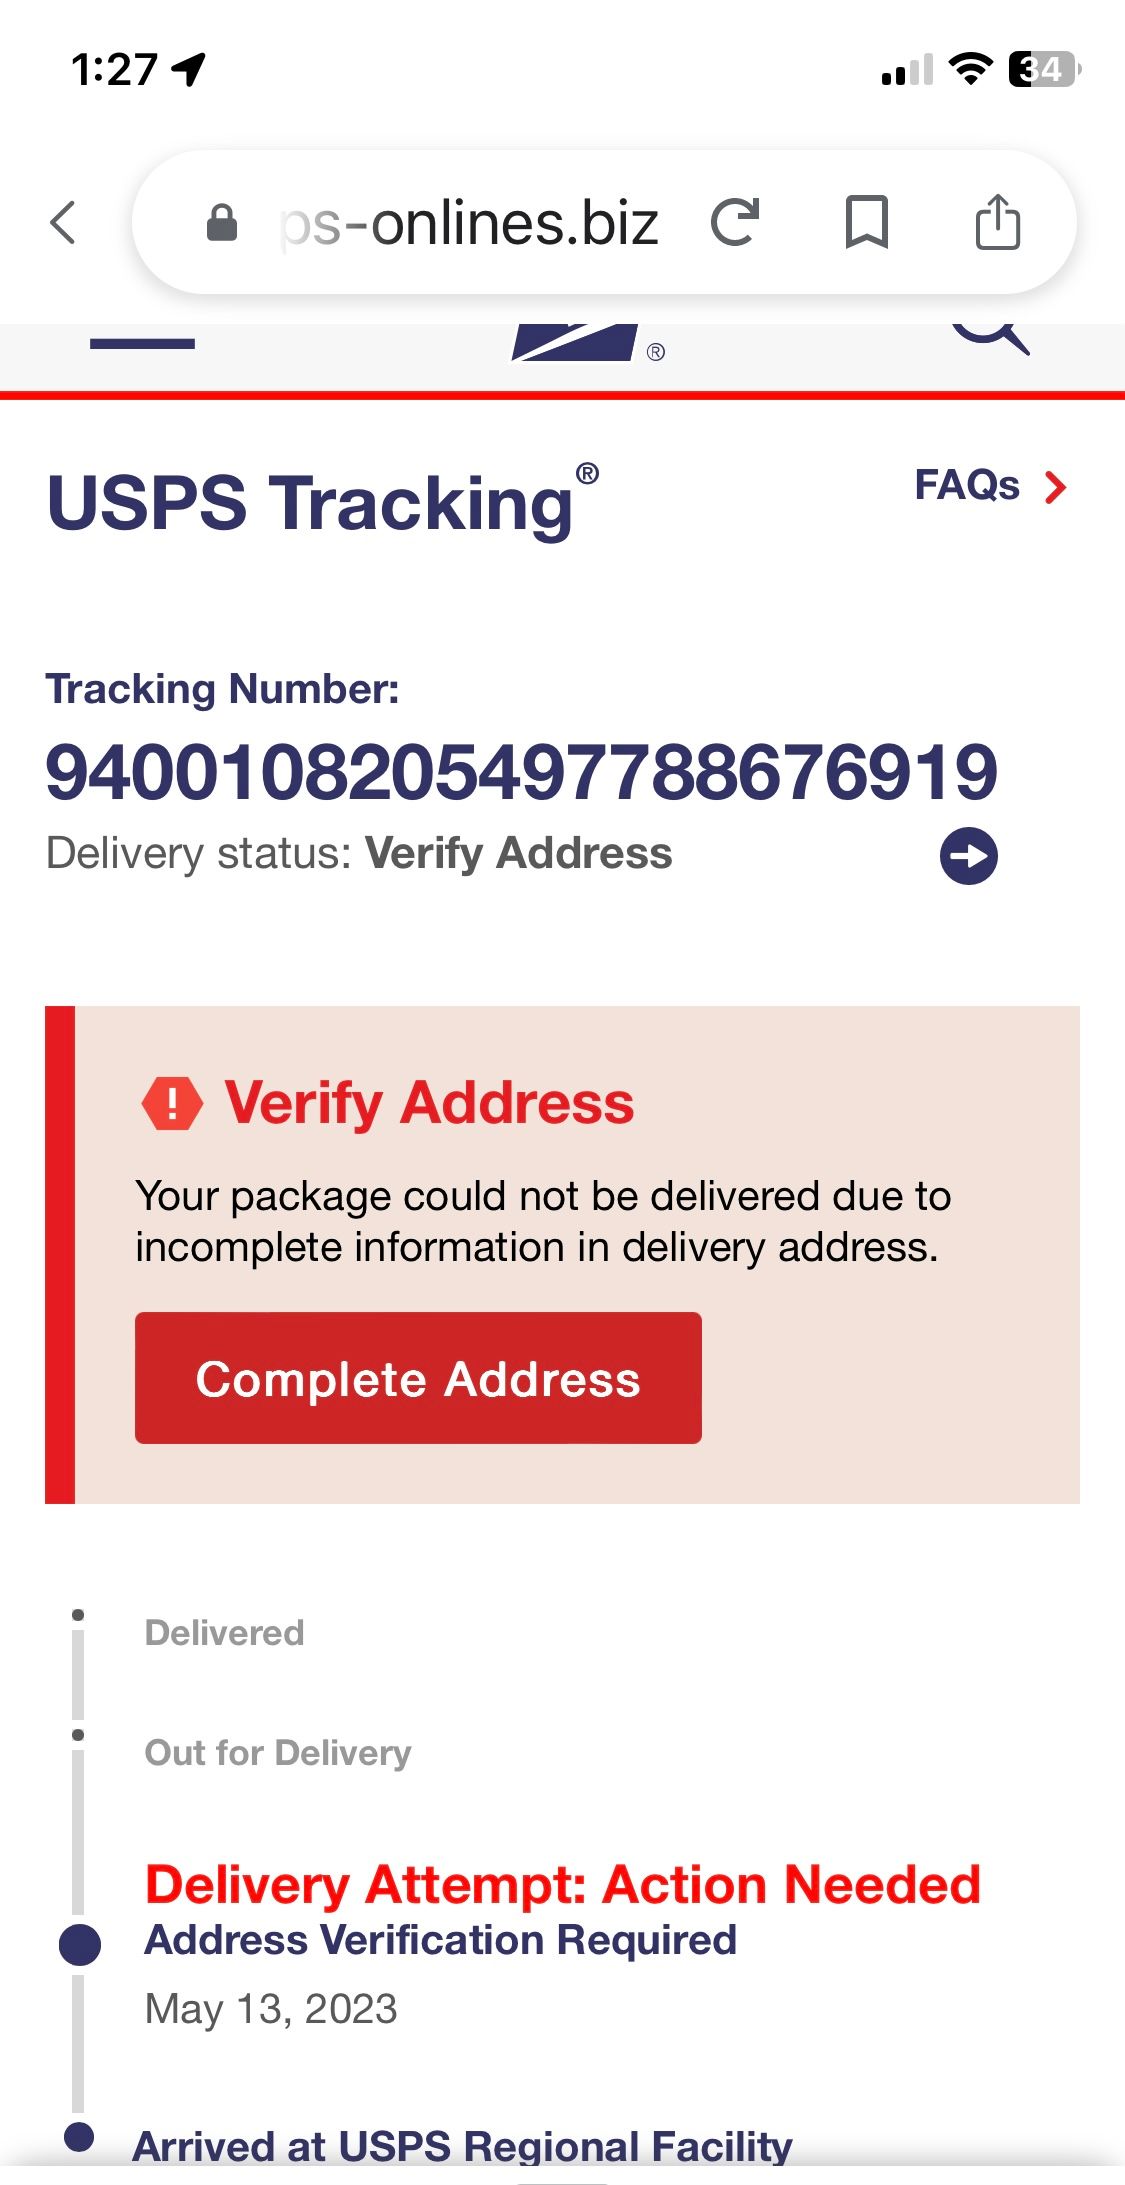 USPS Recycled Tracking Numbers